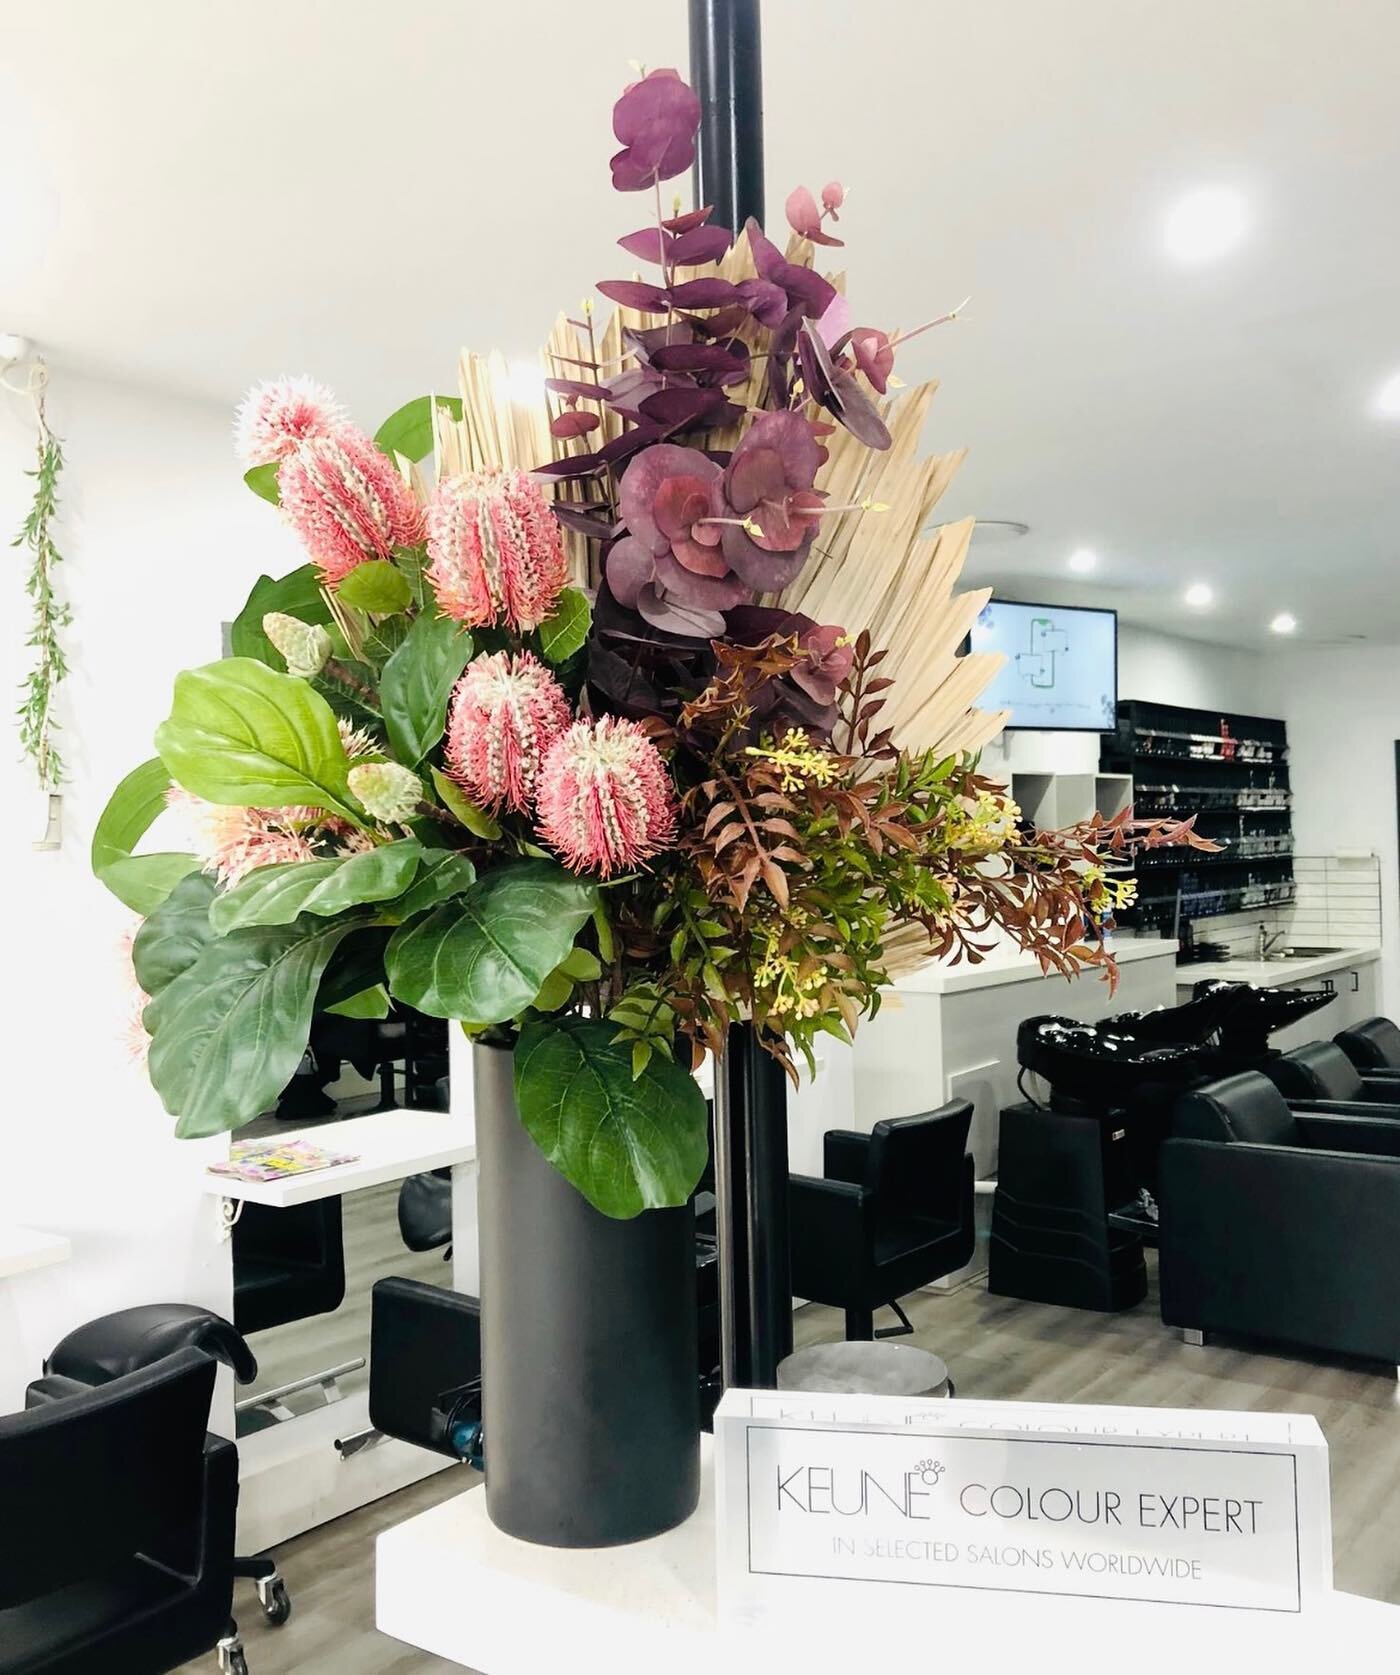 Stunning flower arrangements that stay fresh today, tomorrow and everyday 🌷🌼🌸